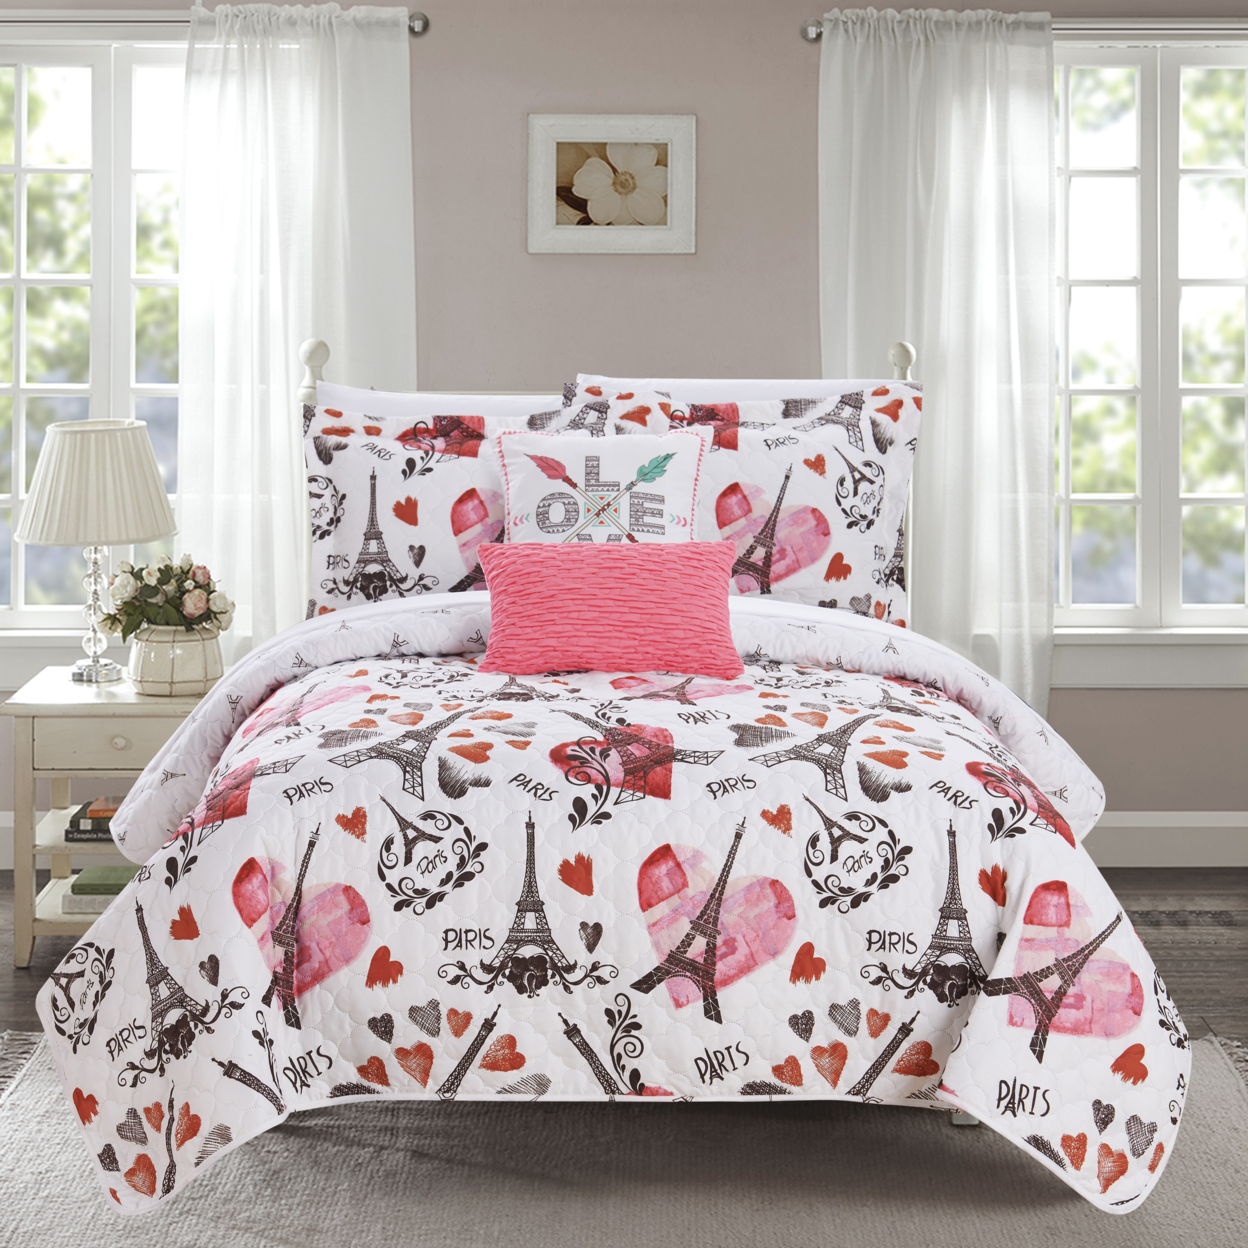 Alphonse 5 Or 4 Piece Reversible Quilt Set Paris Is Love Inspired Printed Design Coverlet Bedding - Pink, Twin